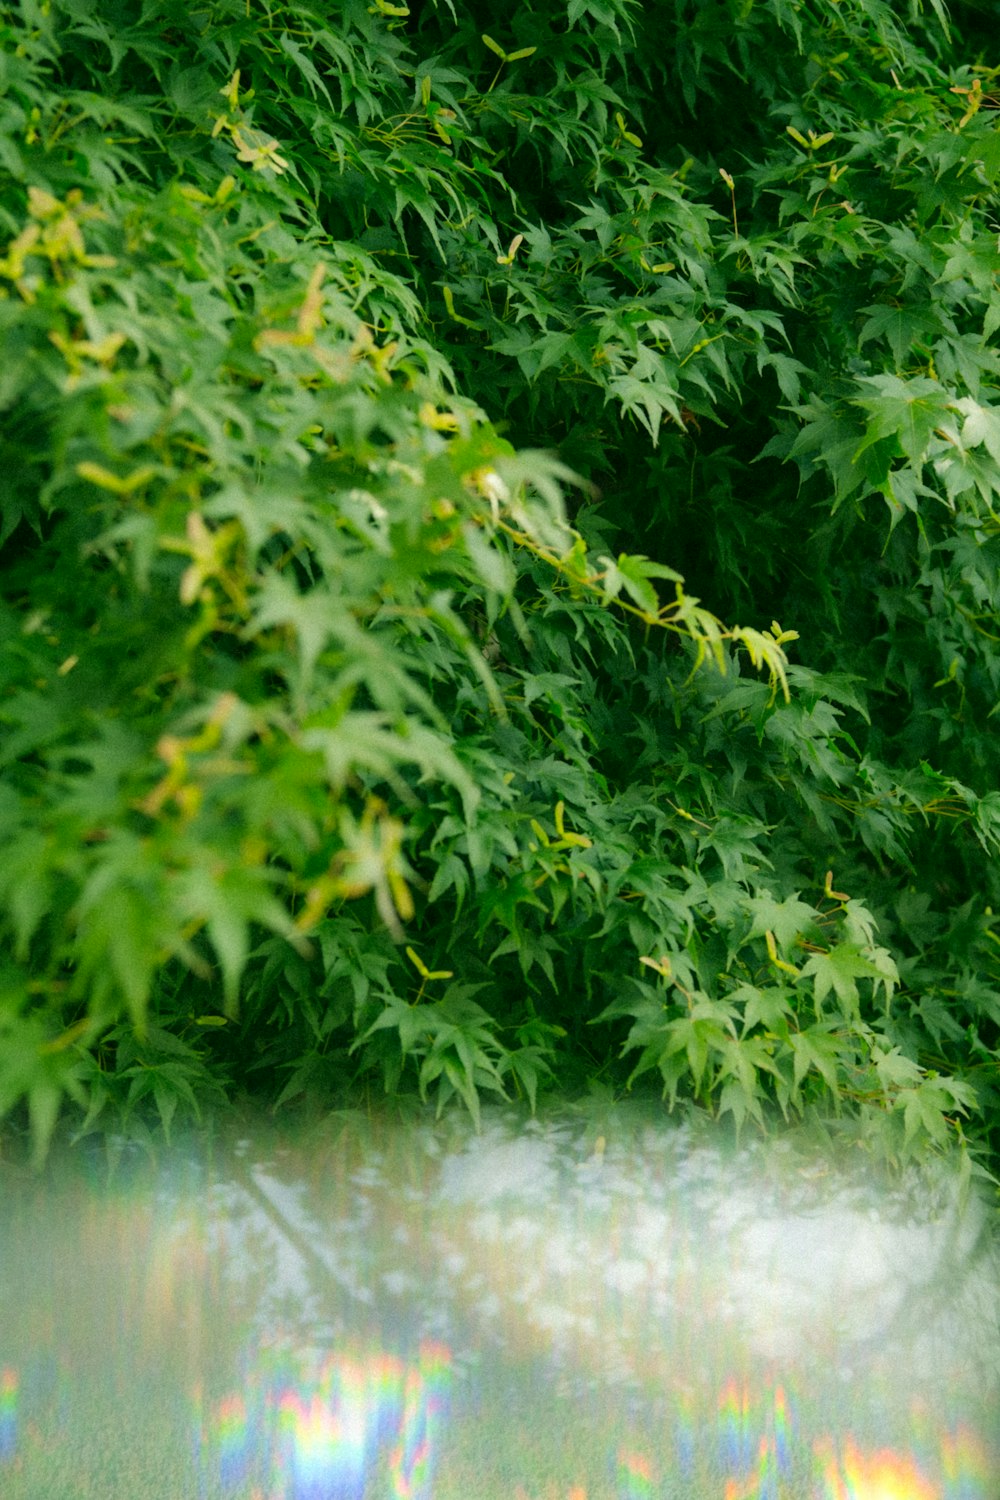 a blurry image of a tree with green leaves